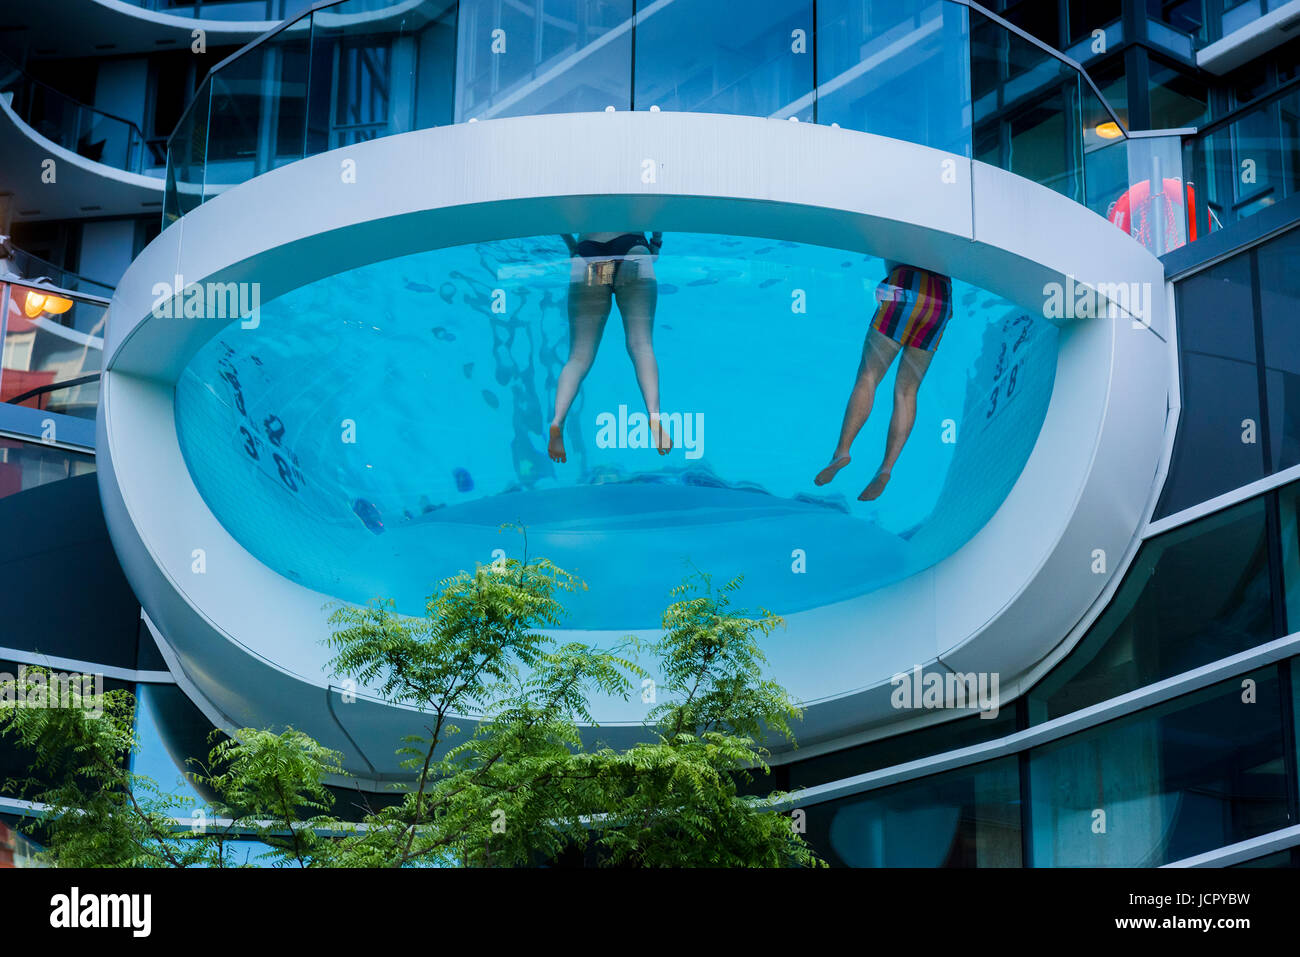 Glass bottomed, see through swimming pool, Yaletown, Vancouver, British Columbia, Canada. Stock Photo